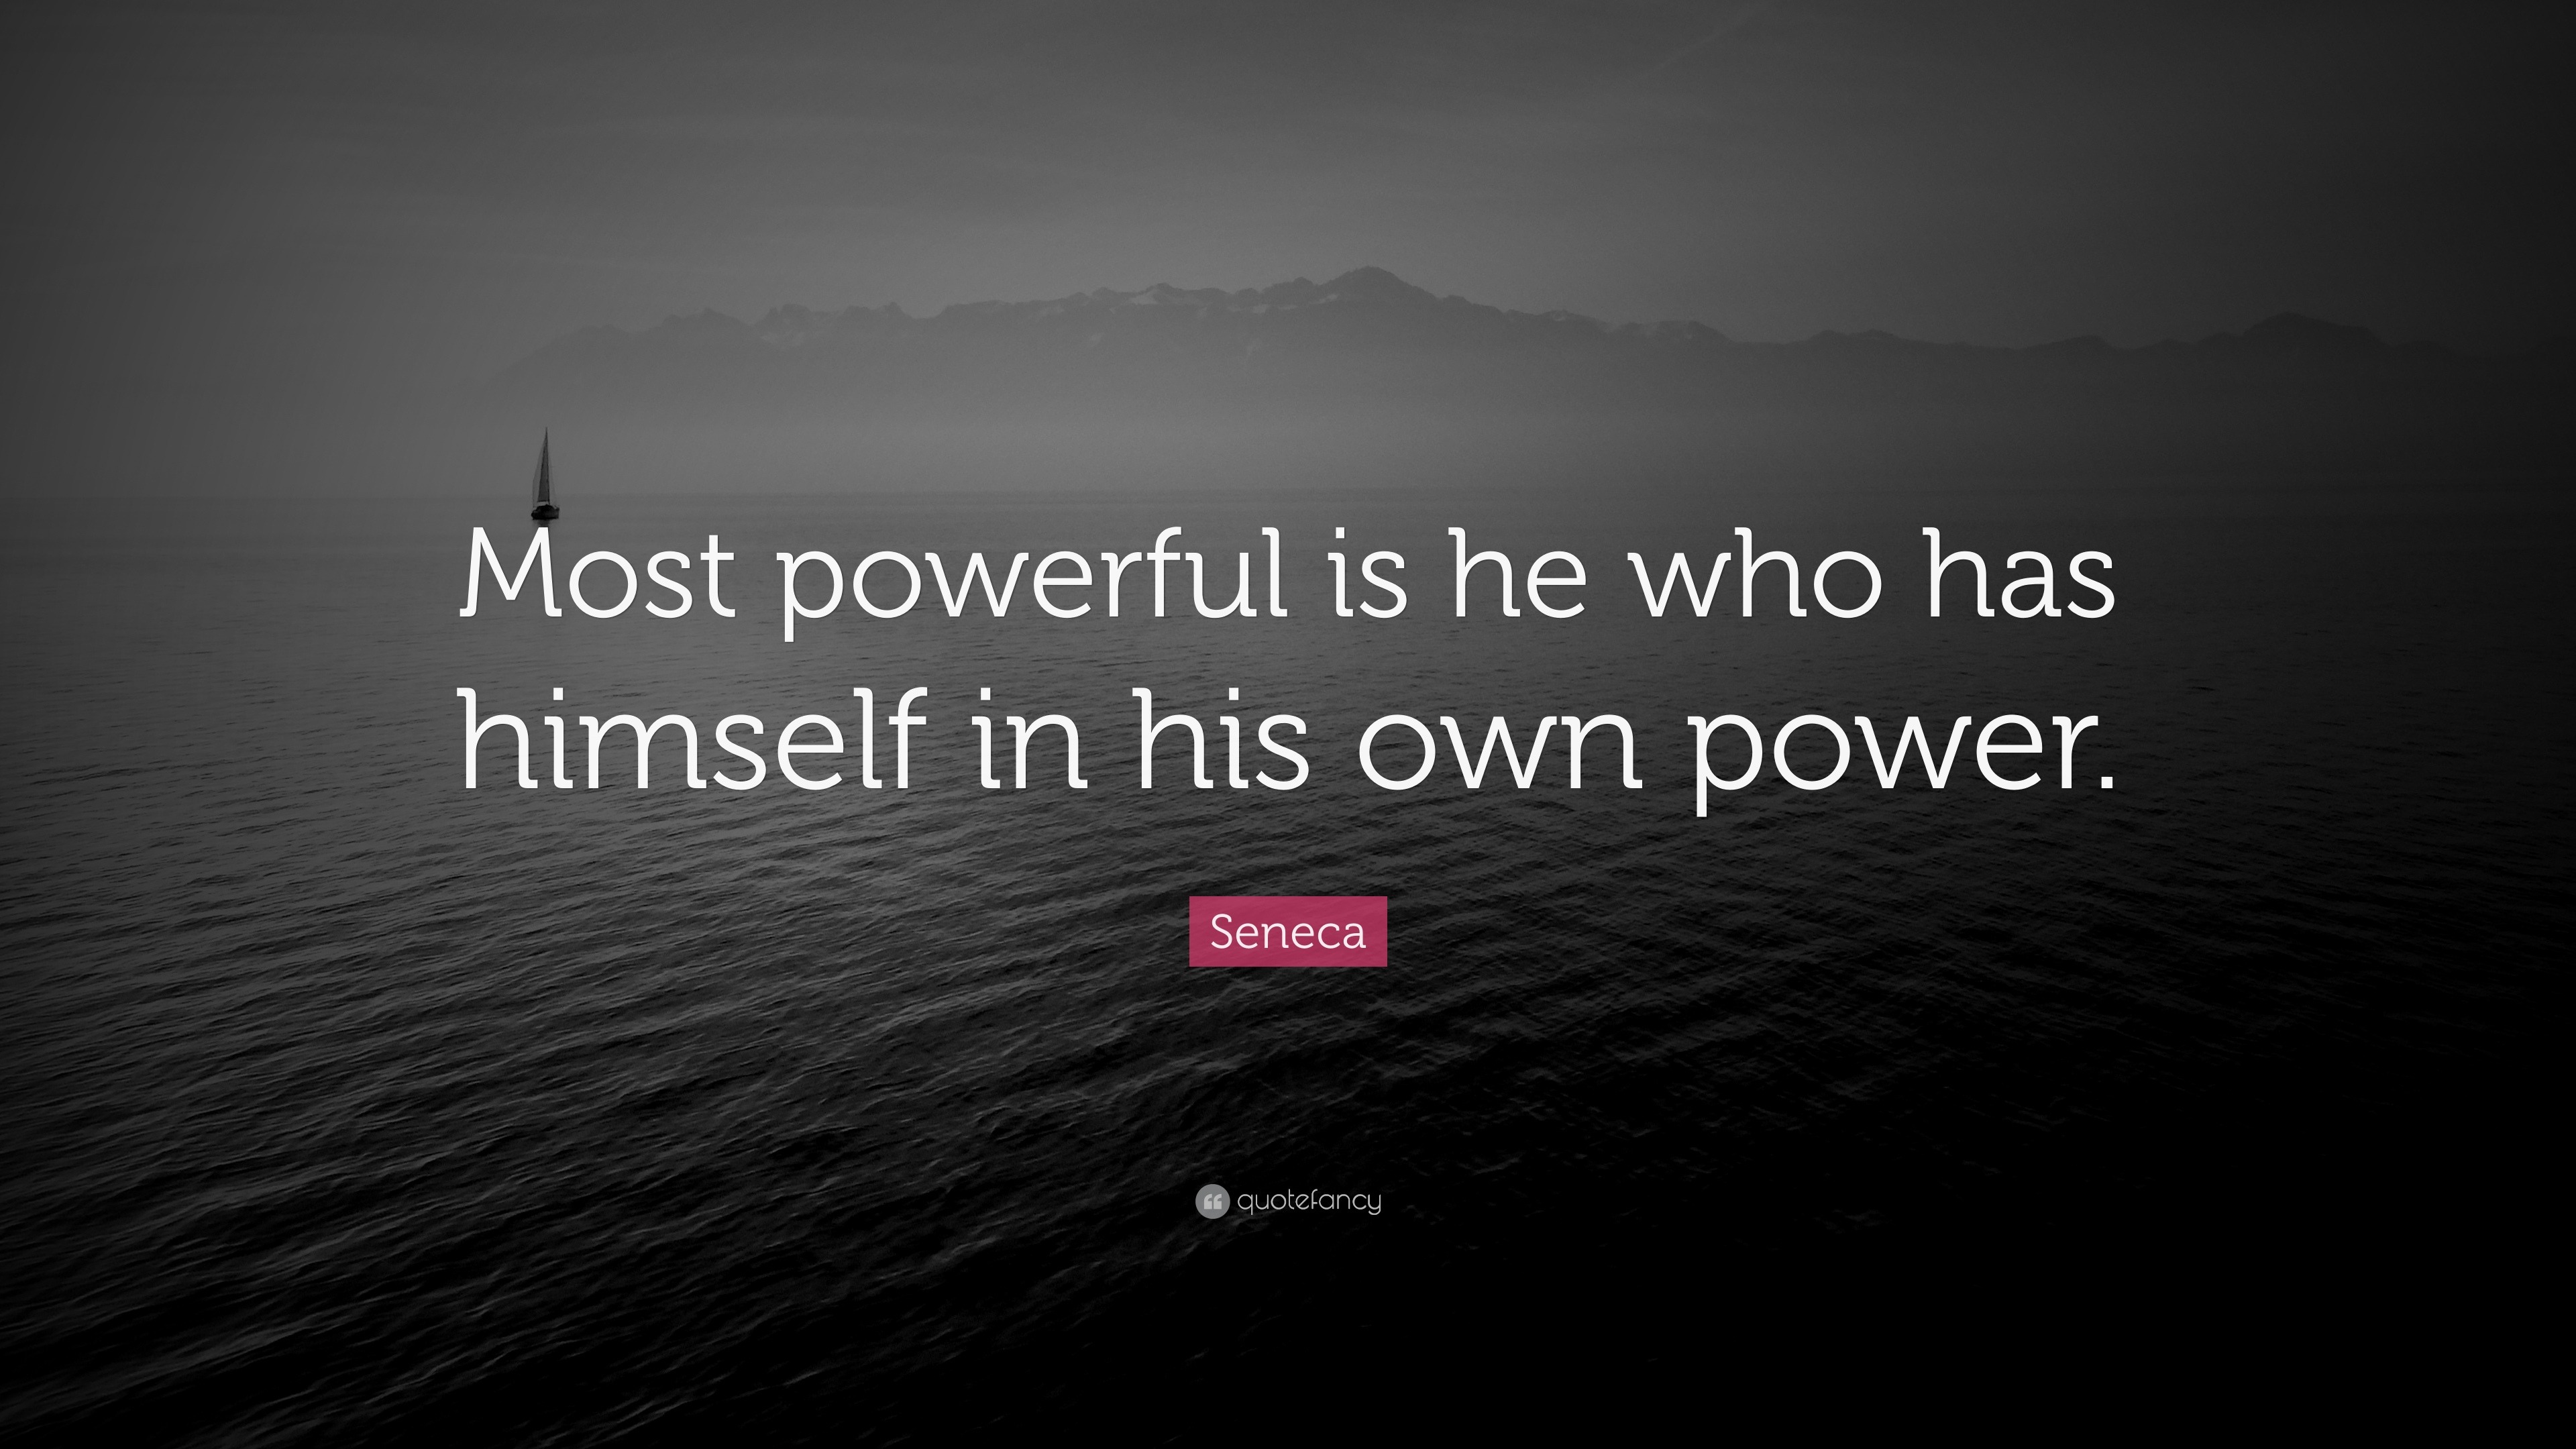 Seneca Quote: "Most powerful is he who has himself in his own power."